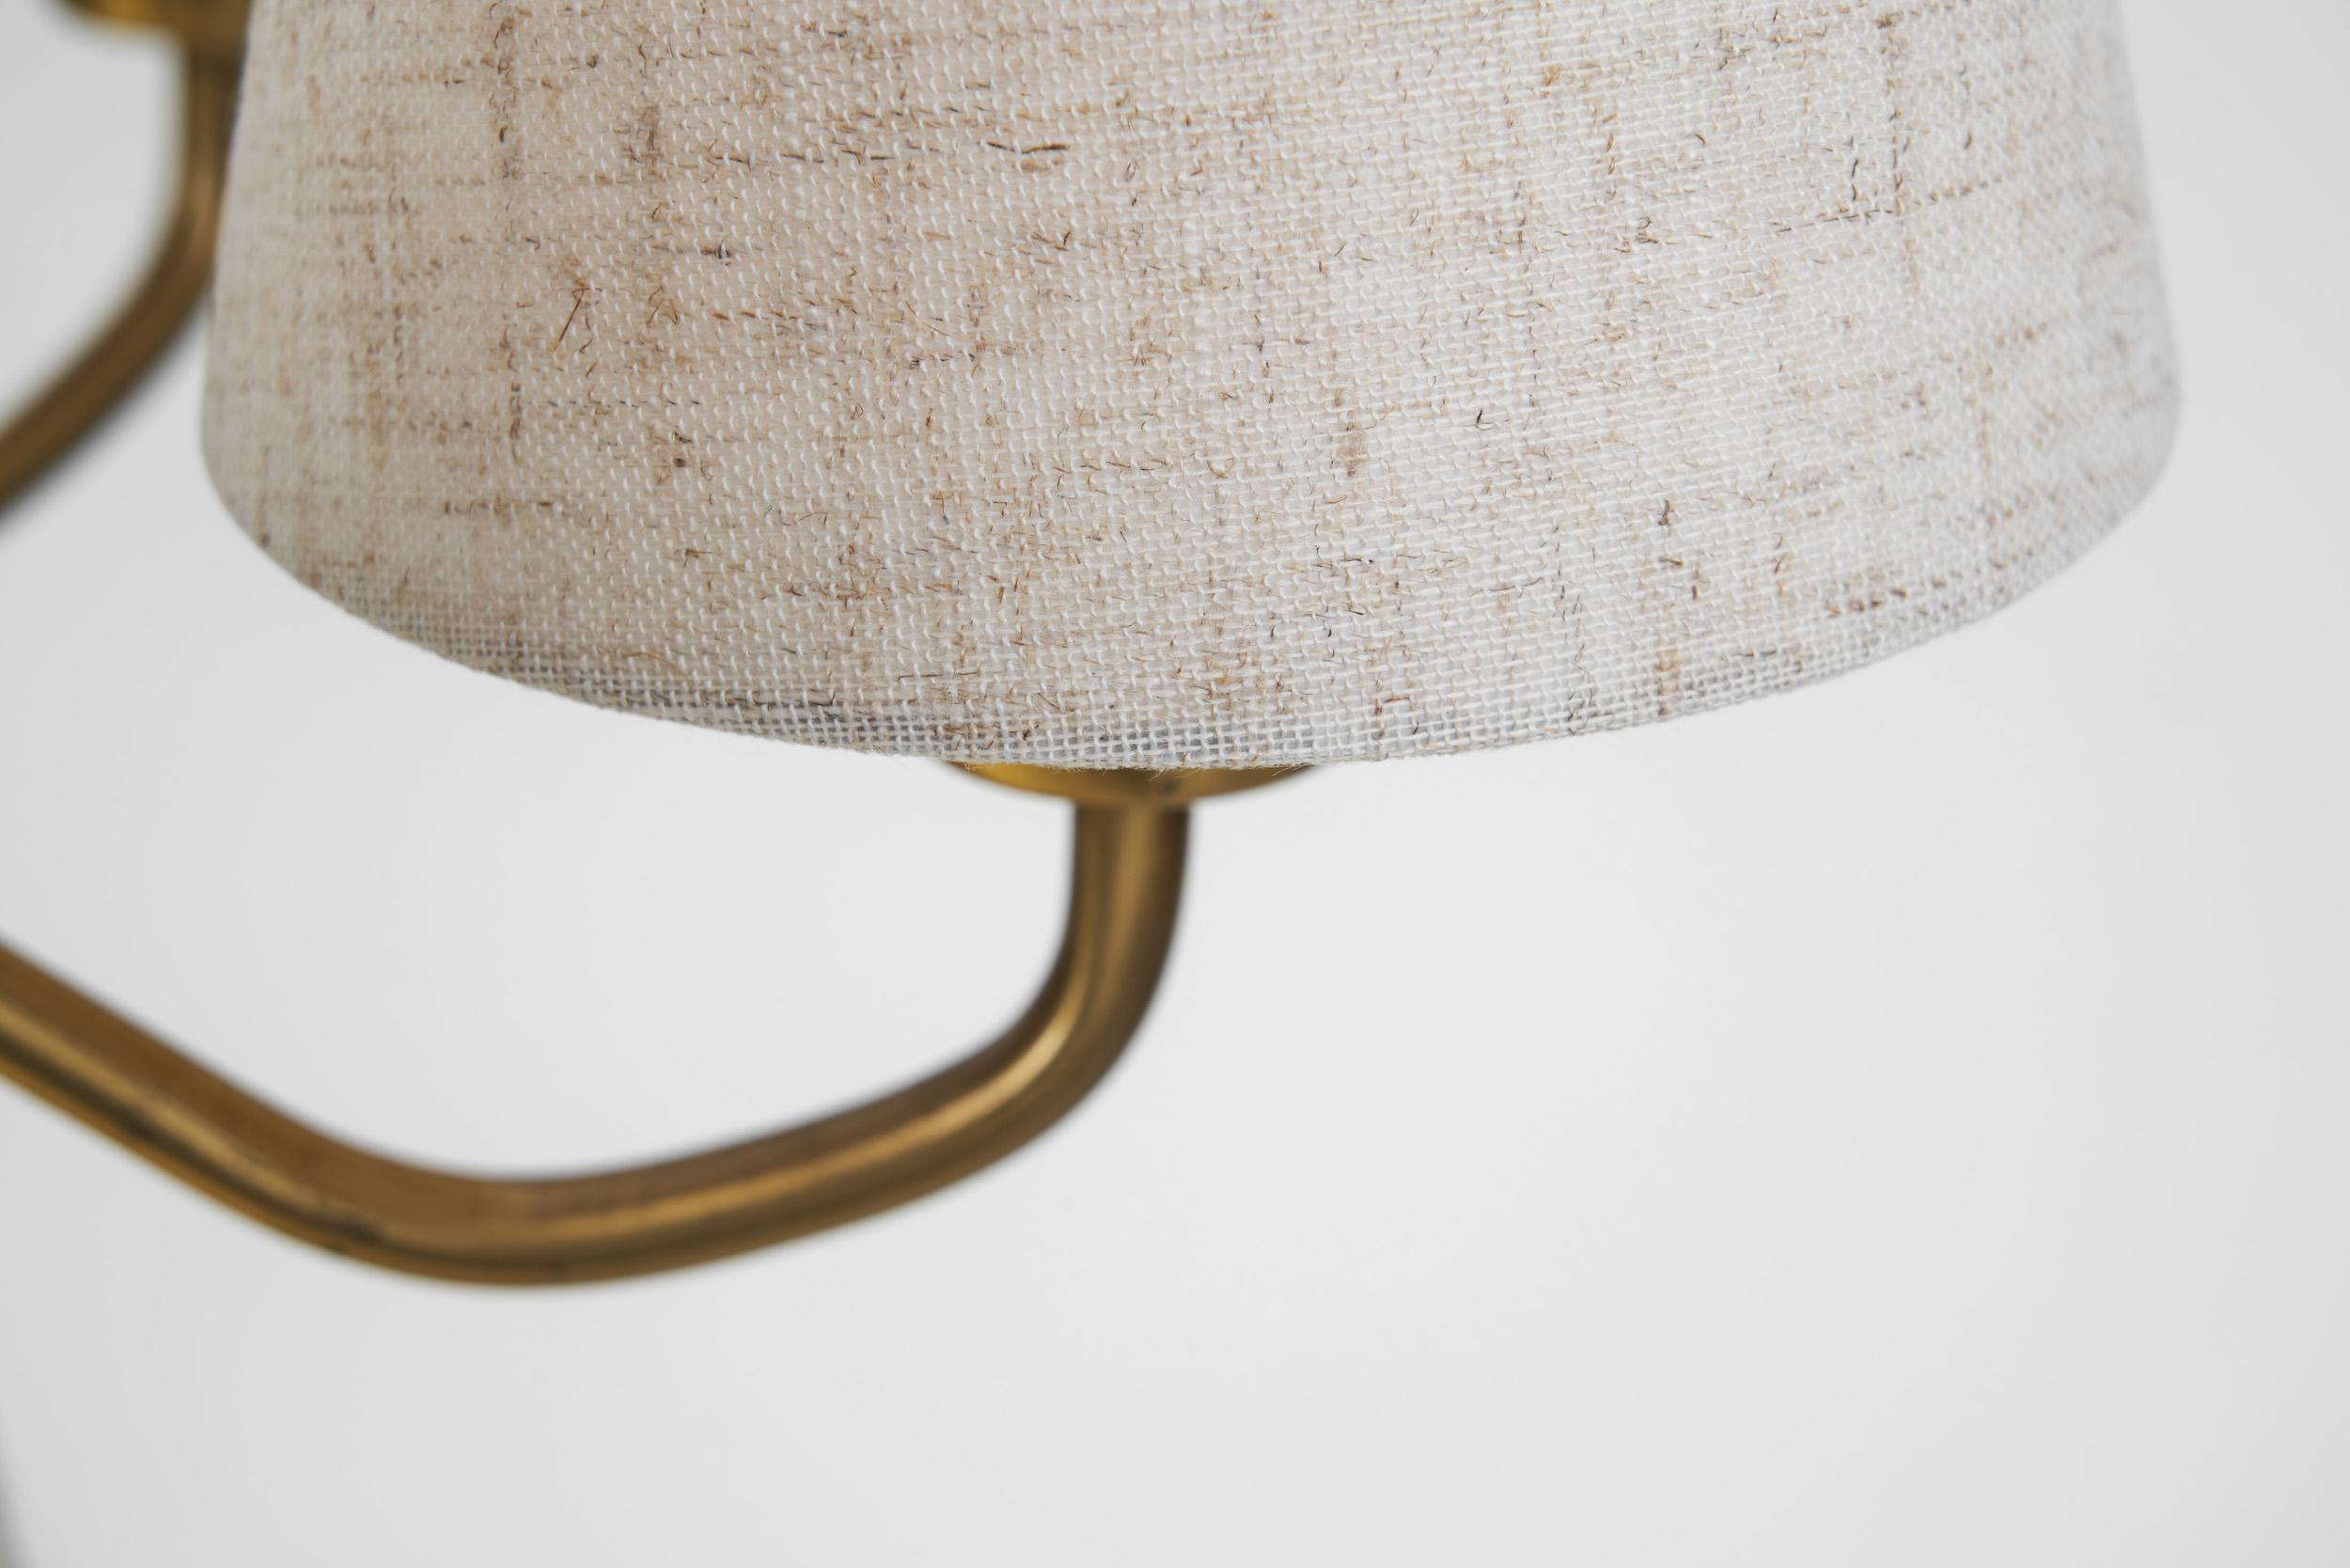 Swedish Modern Brass Ceiling Light with Fabric Shades, Sweden Mid-20th Century For Sale 12